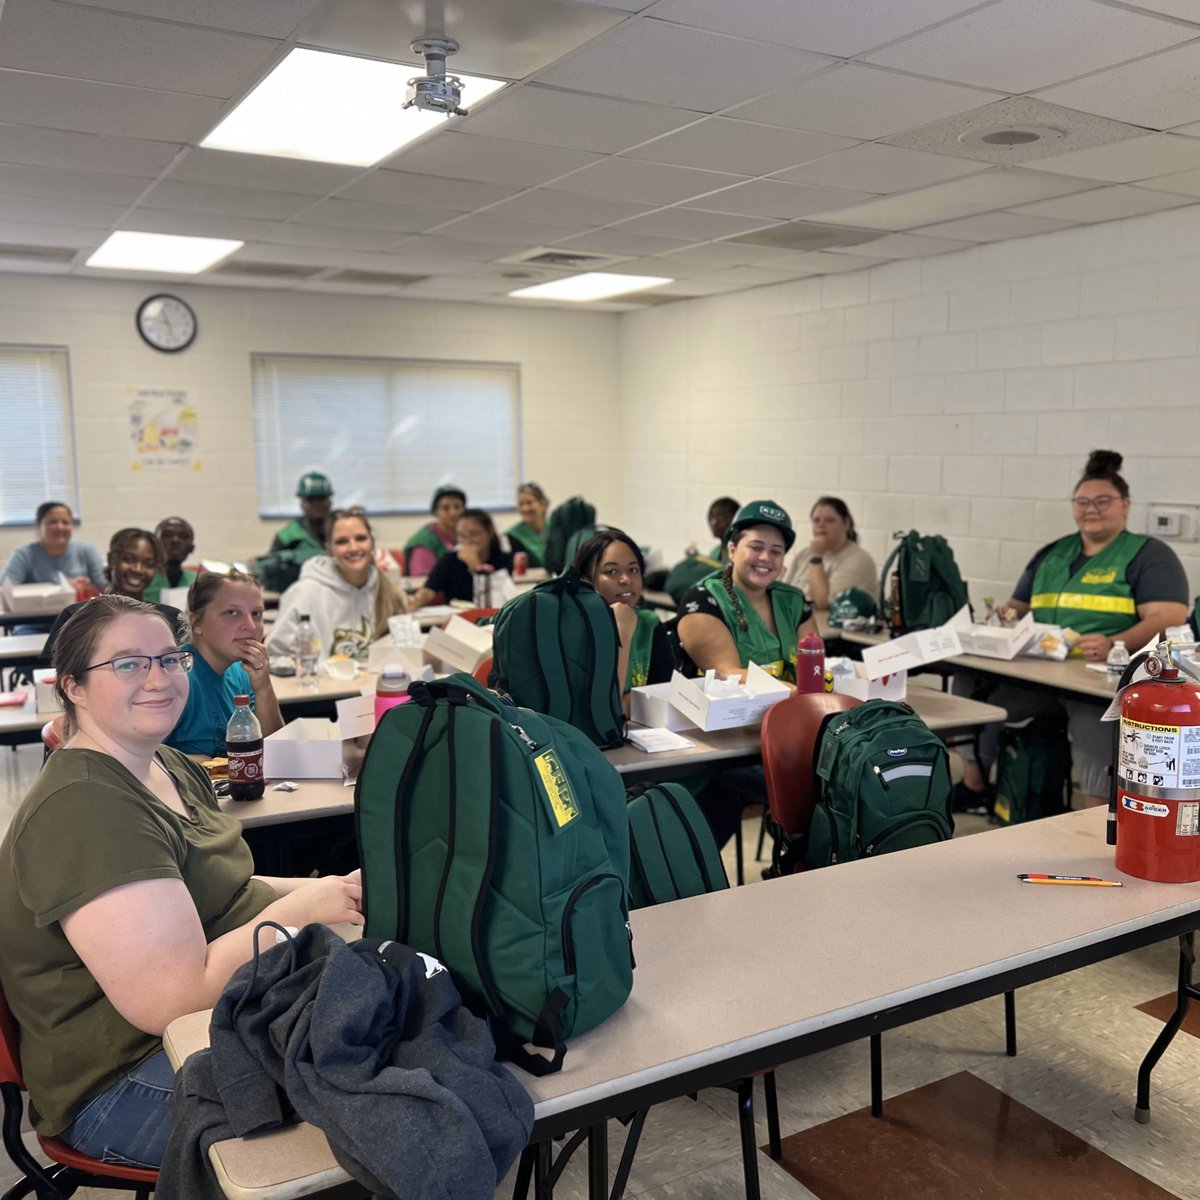 As hurricane season quickly approaches in June, it's important that communities are prepared to respond if disaster hits. To prepare, CORE began hosting Community Emergency Response Team (CERT) trainings in Robeson County were we trained over 130 adult and teen volunteers